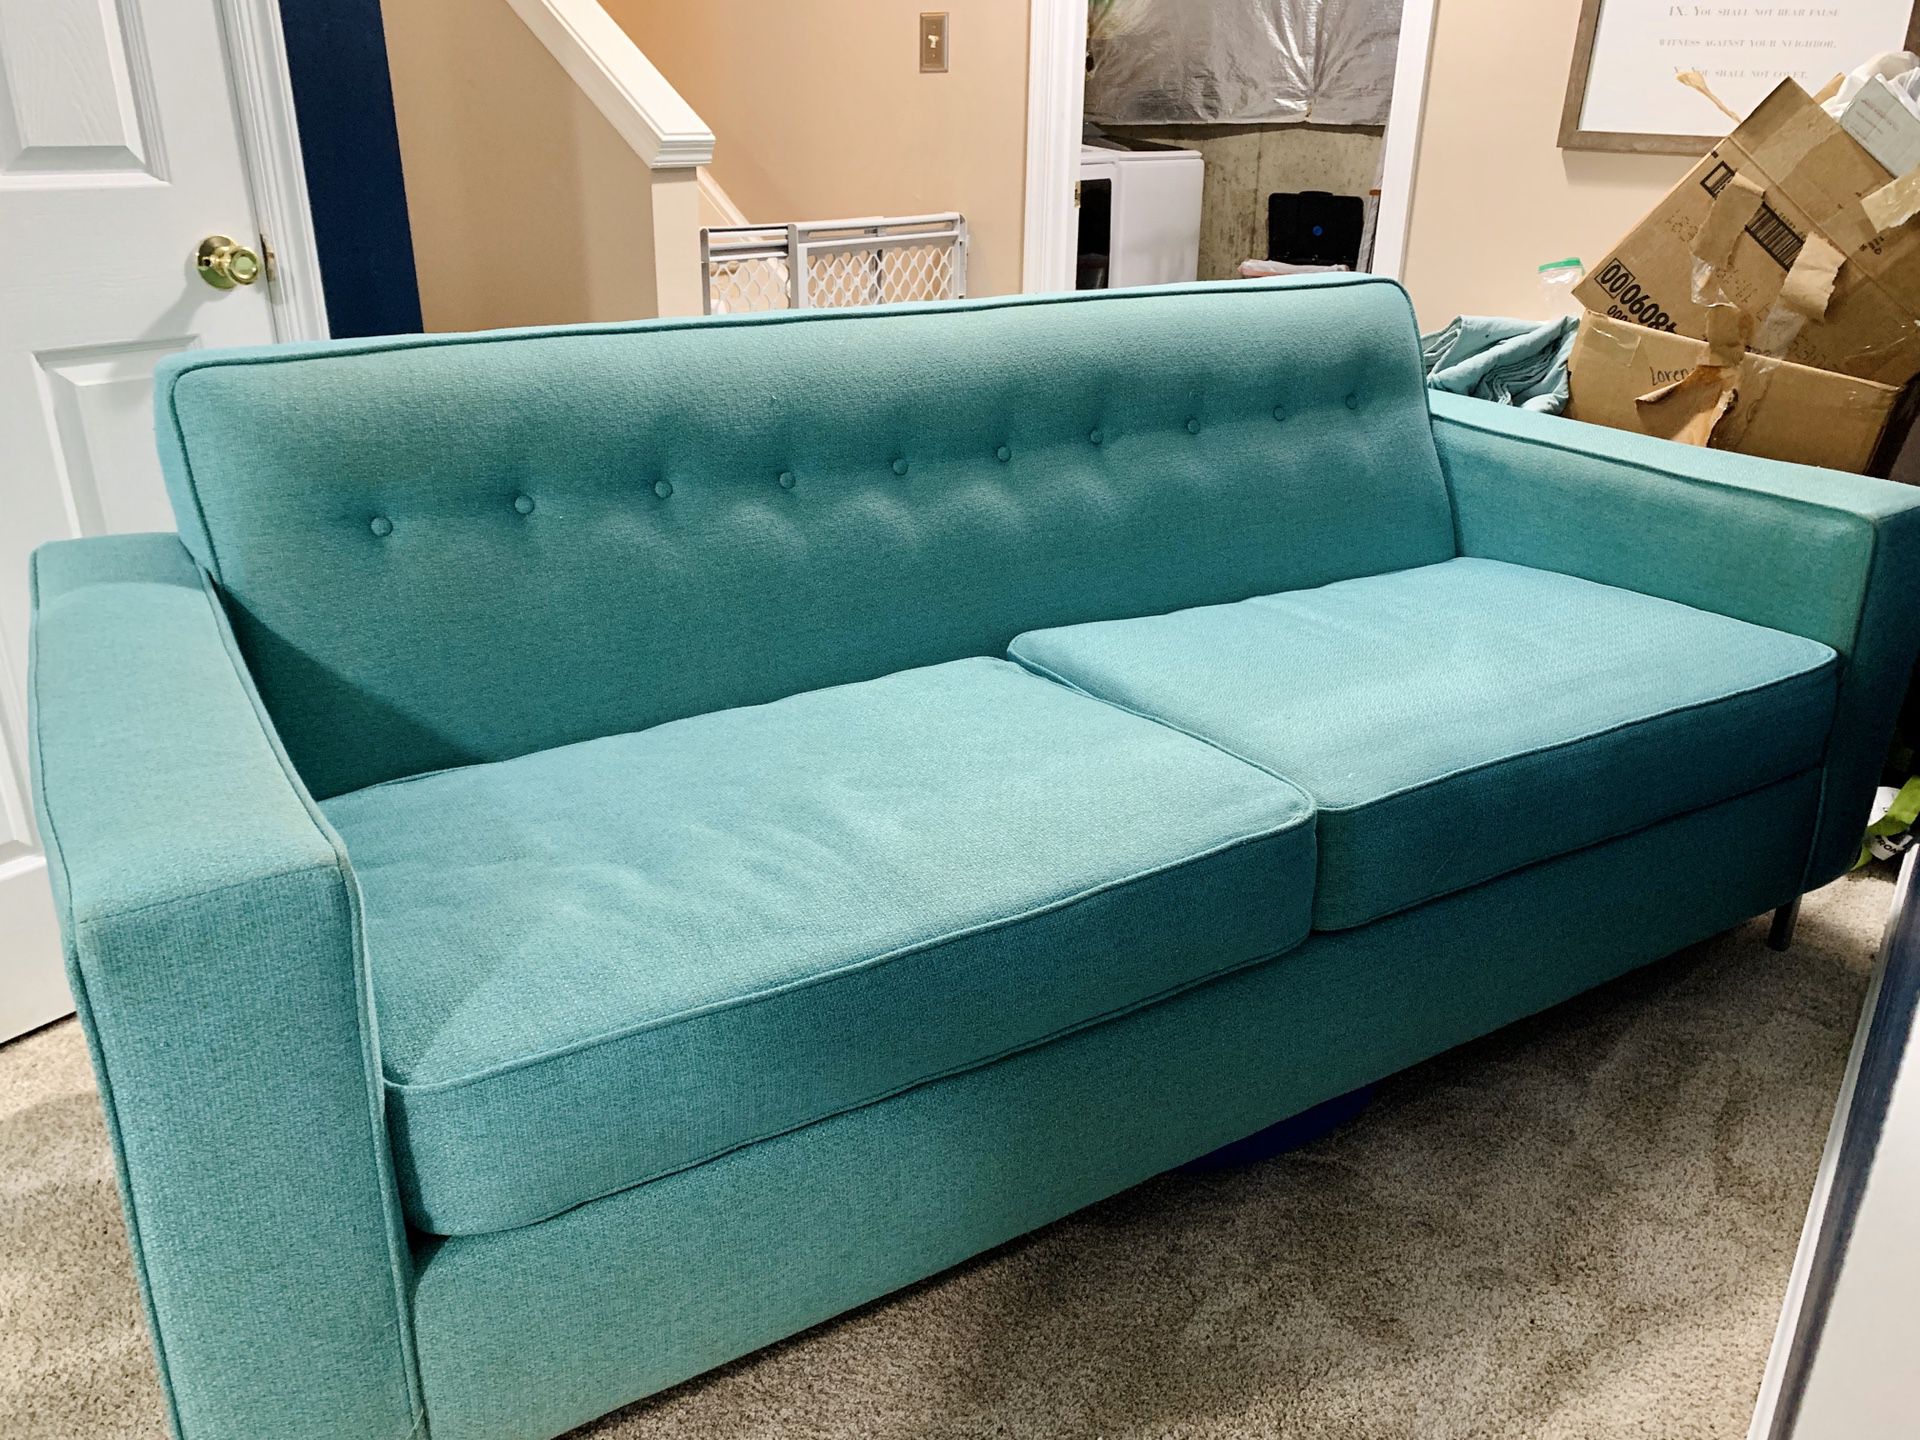 Turquoise couches